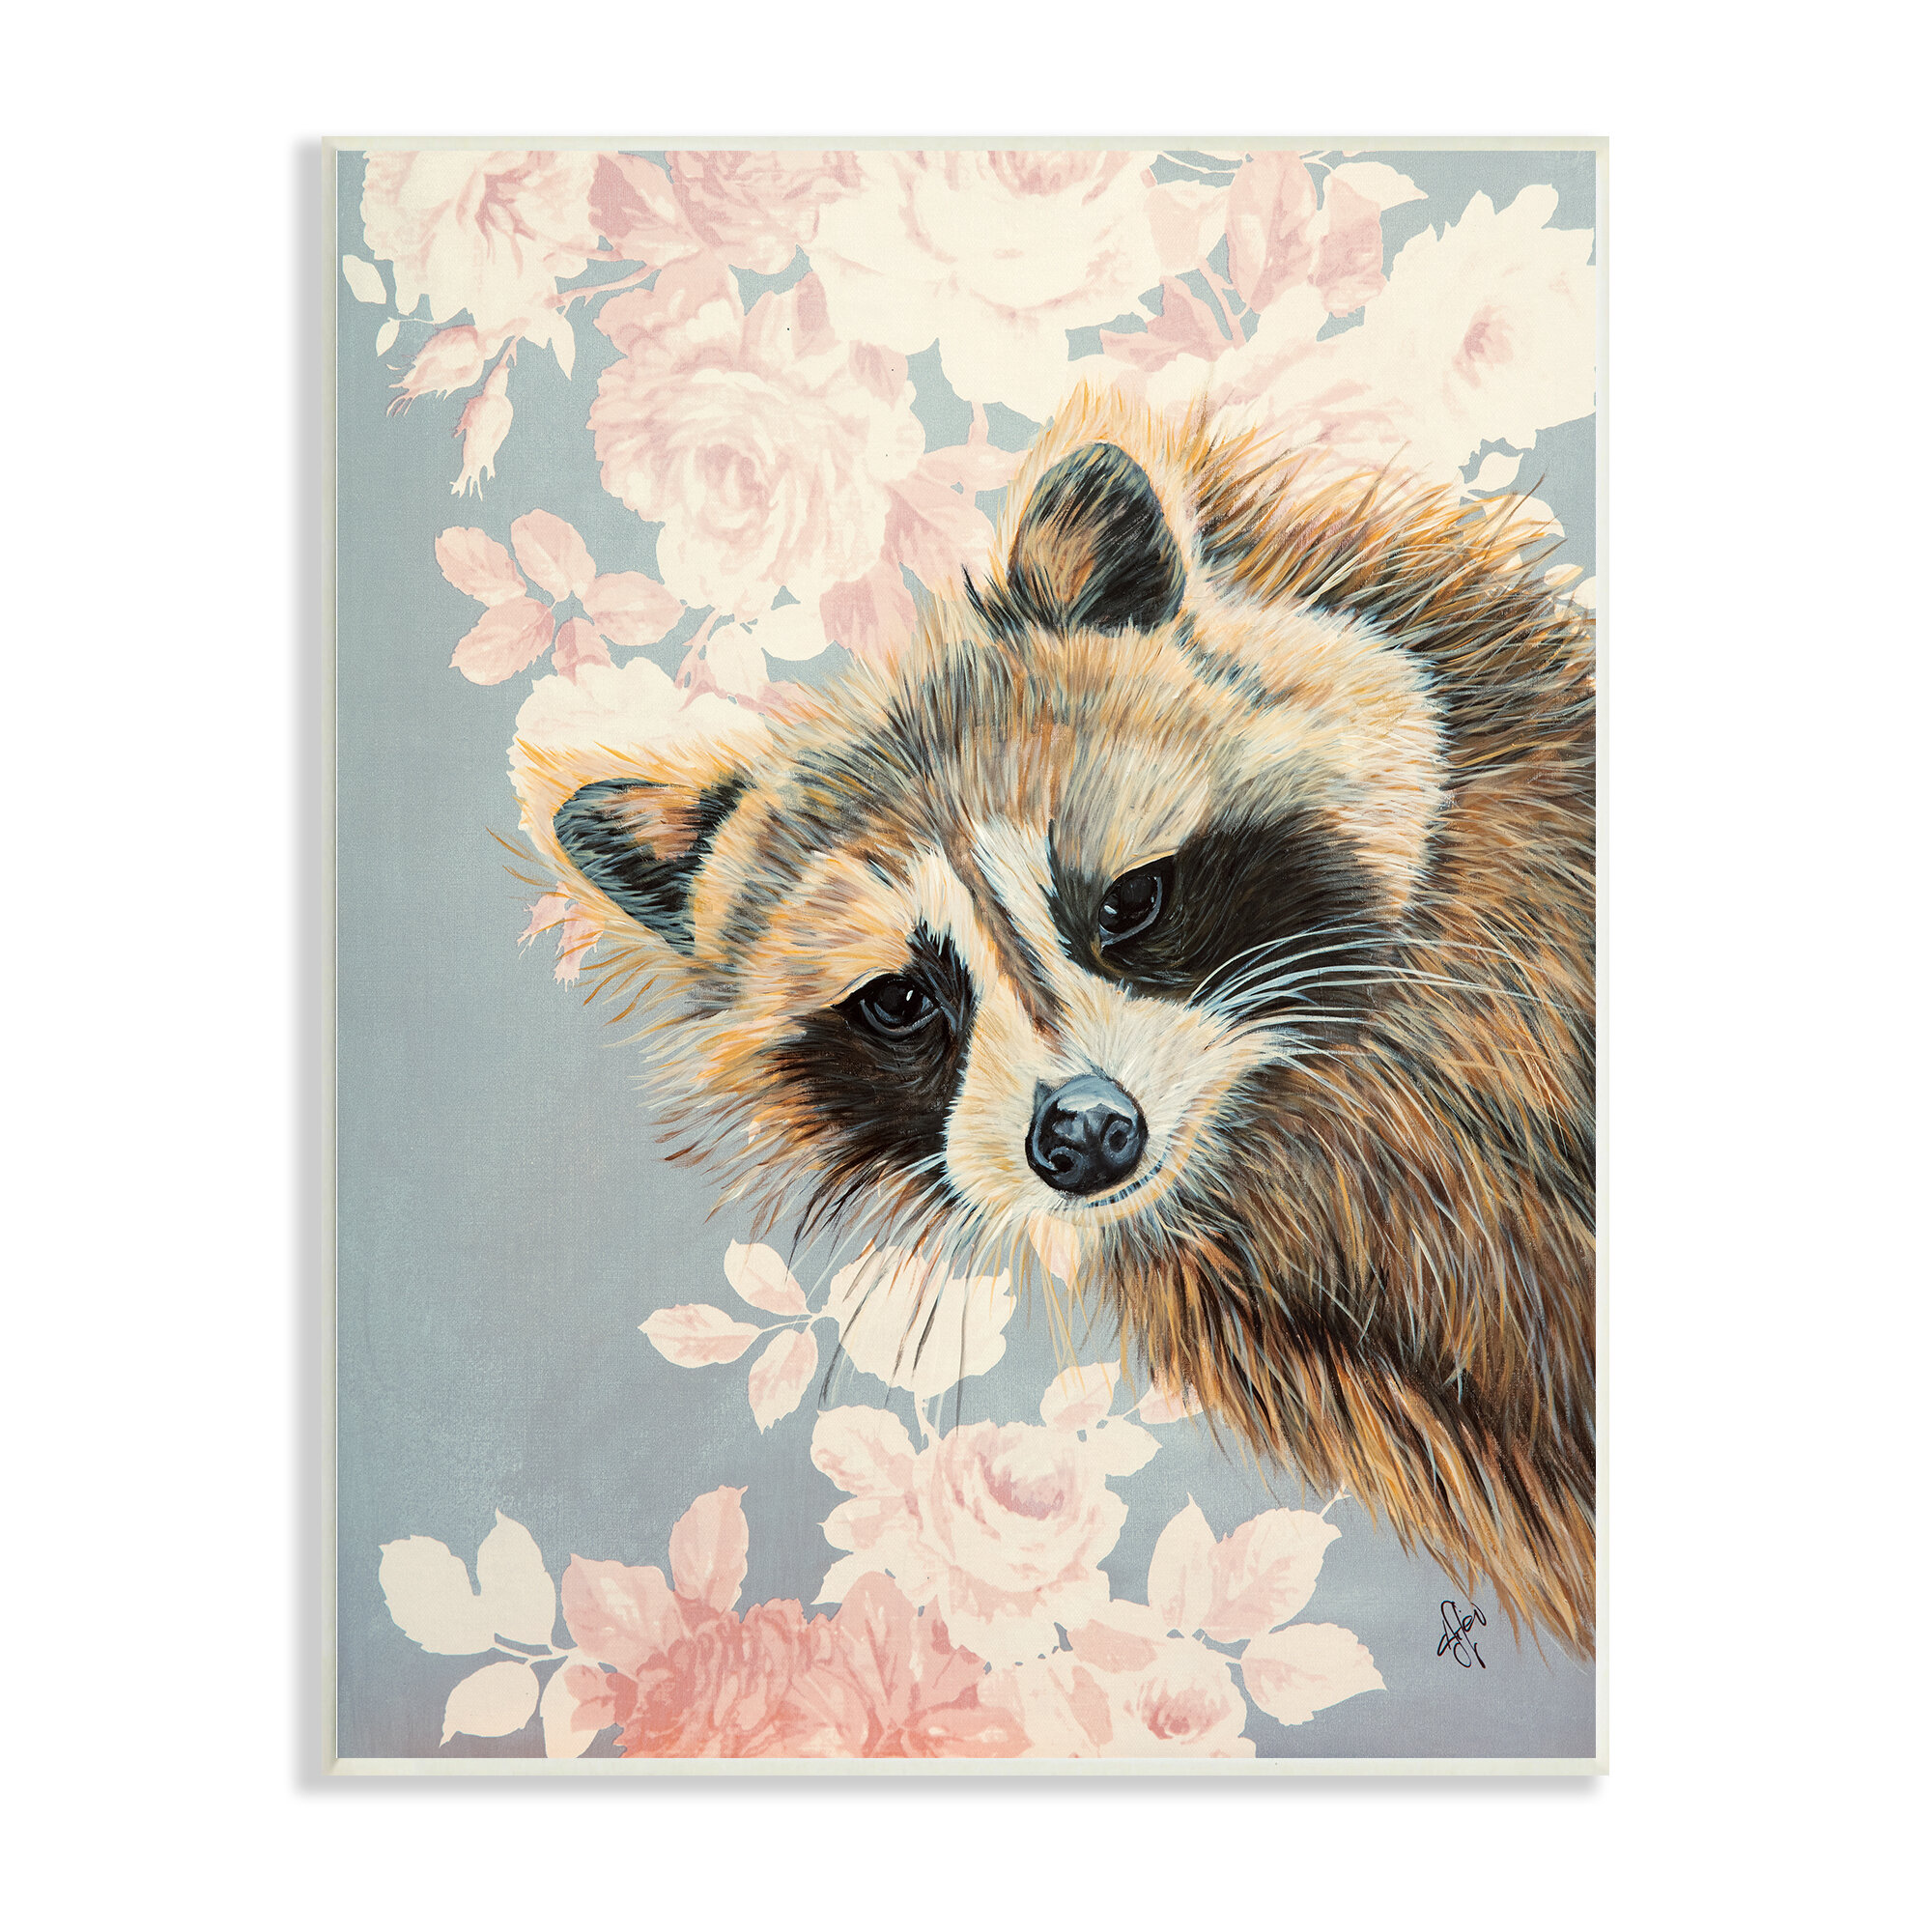 Stupell Industries Raccoon Hanging From Pink Flowers Animal